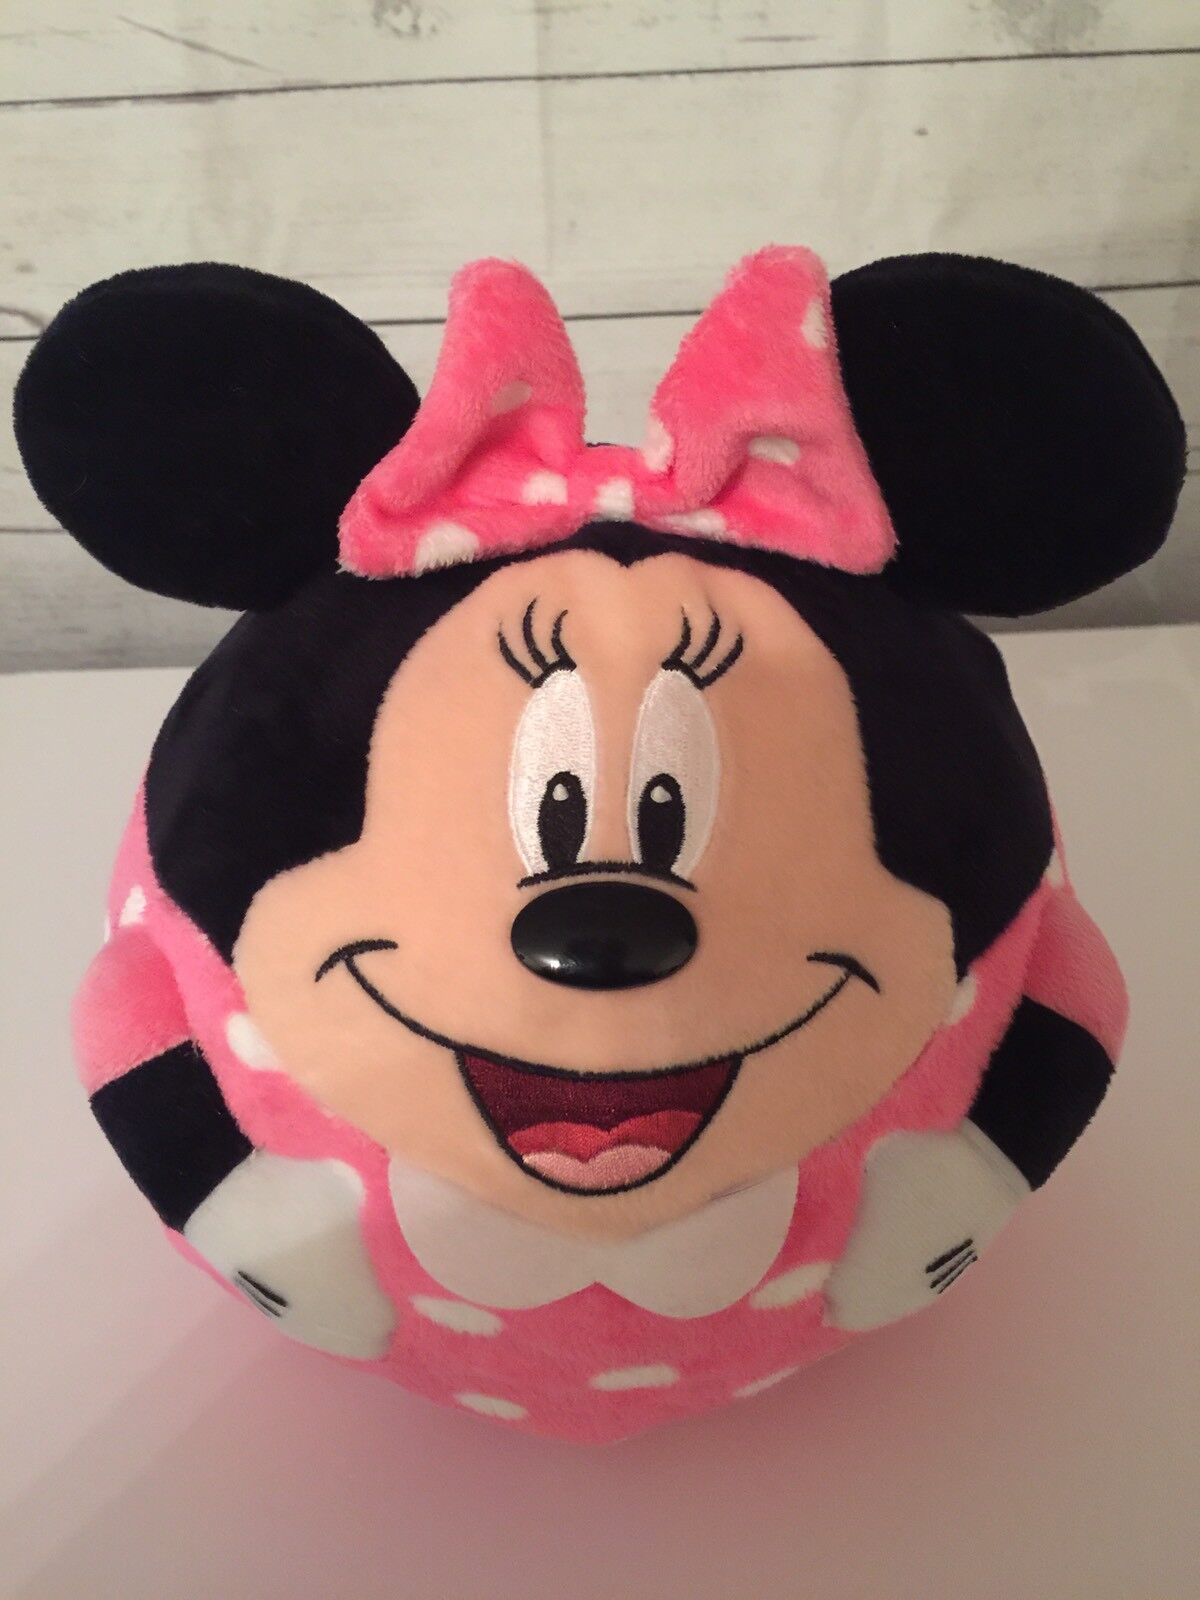 TY Minnie Mouse Beanie Ballz Large Pink With White Polka Dots 9 Inch Plush PB